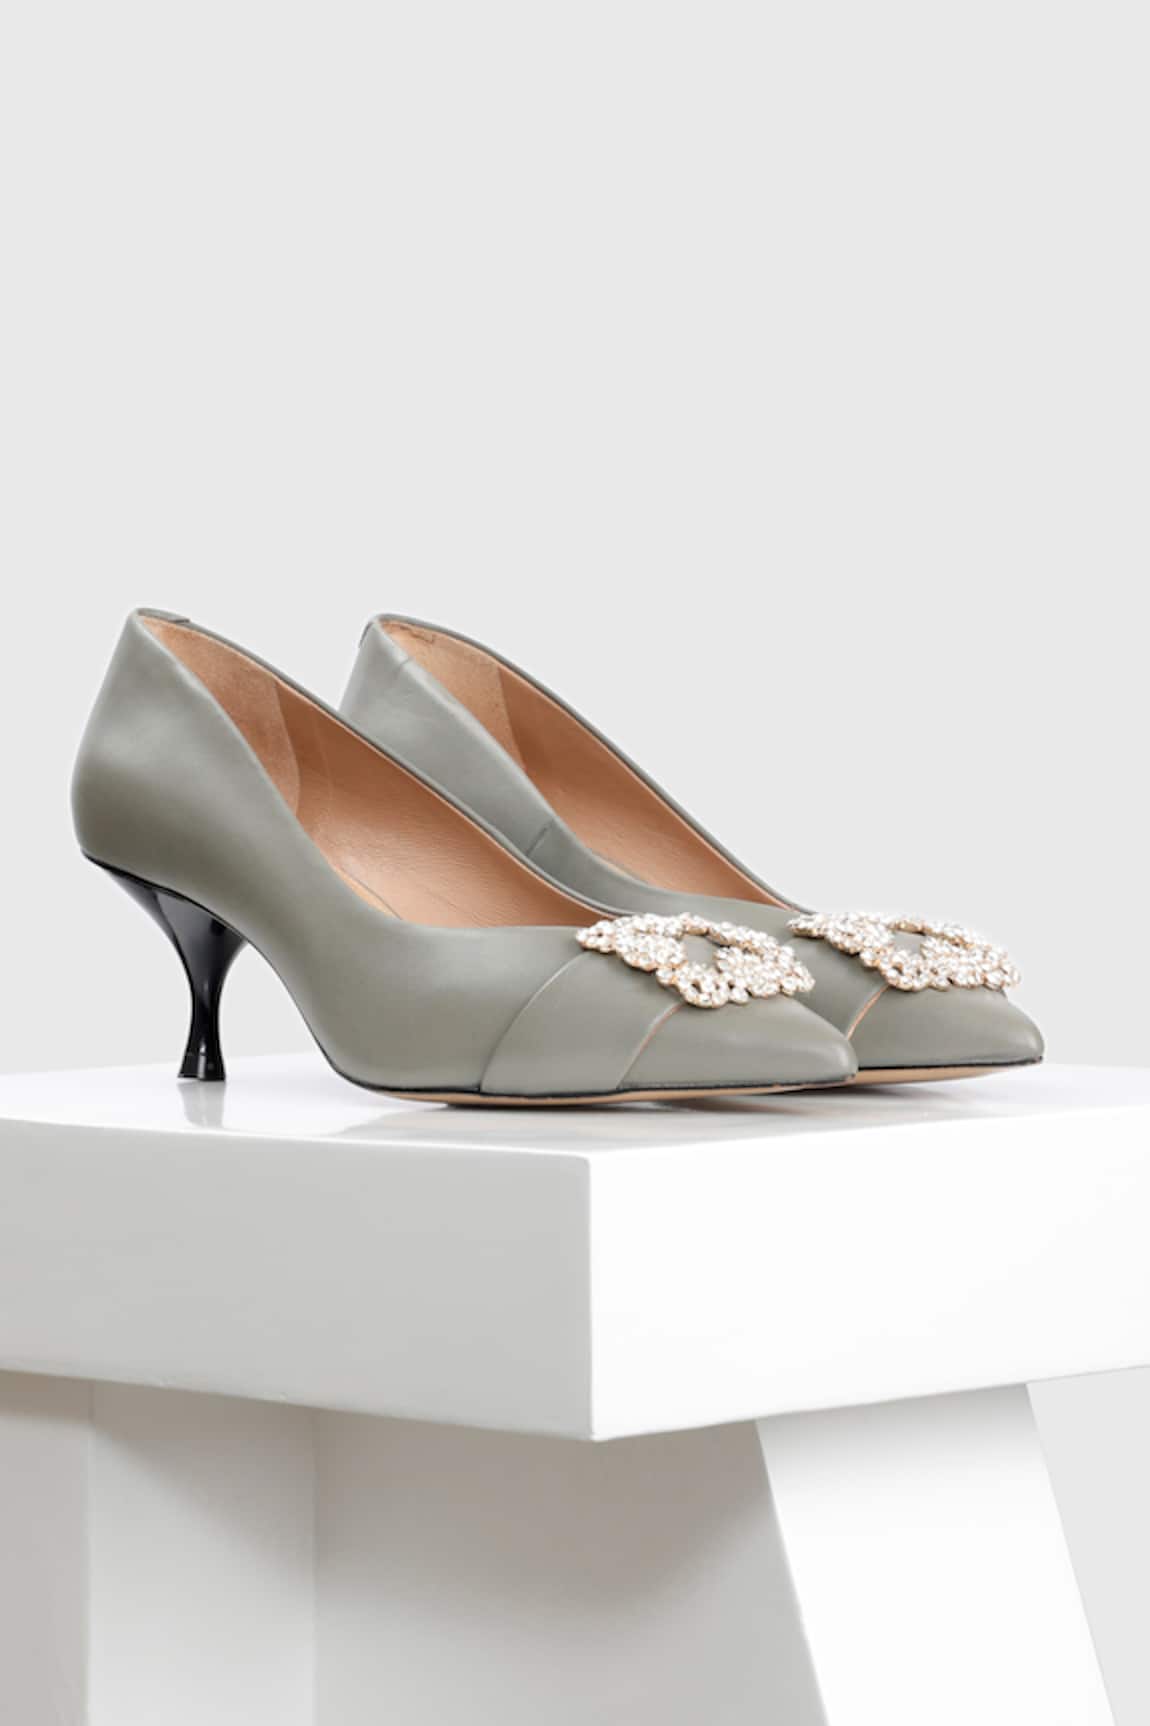 OROH Marbella Leather Stone Embellished Pumps